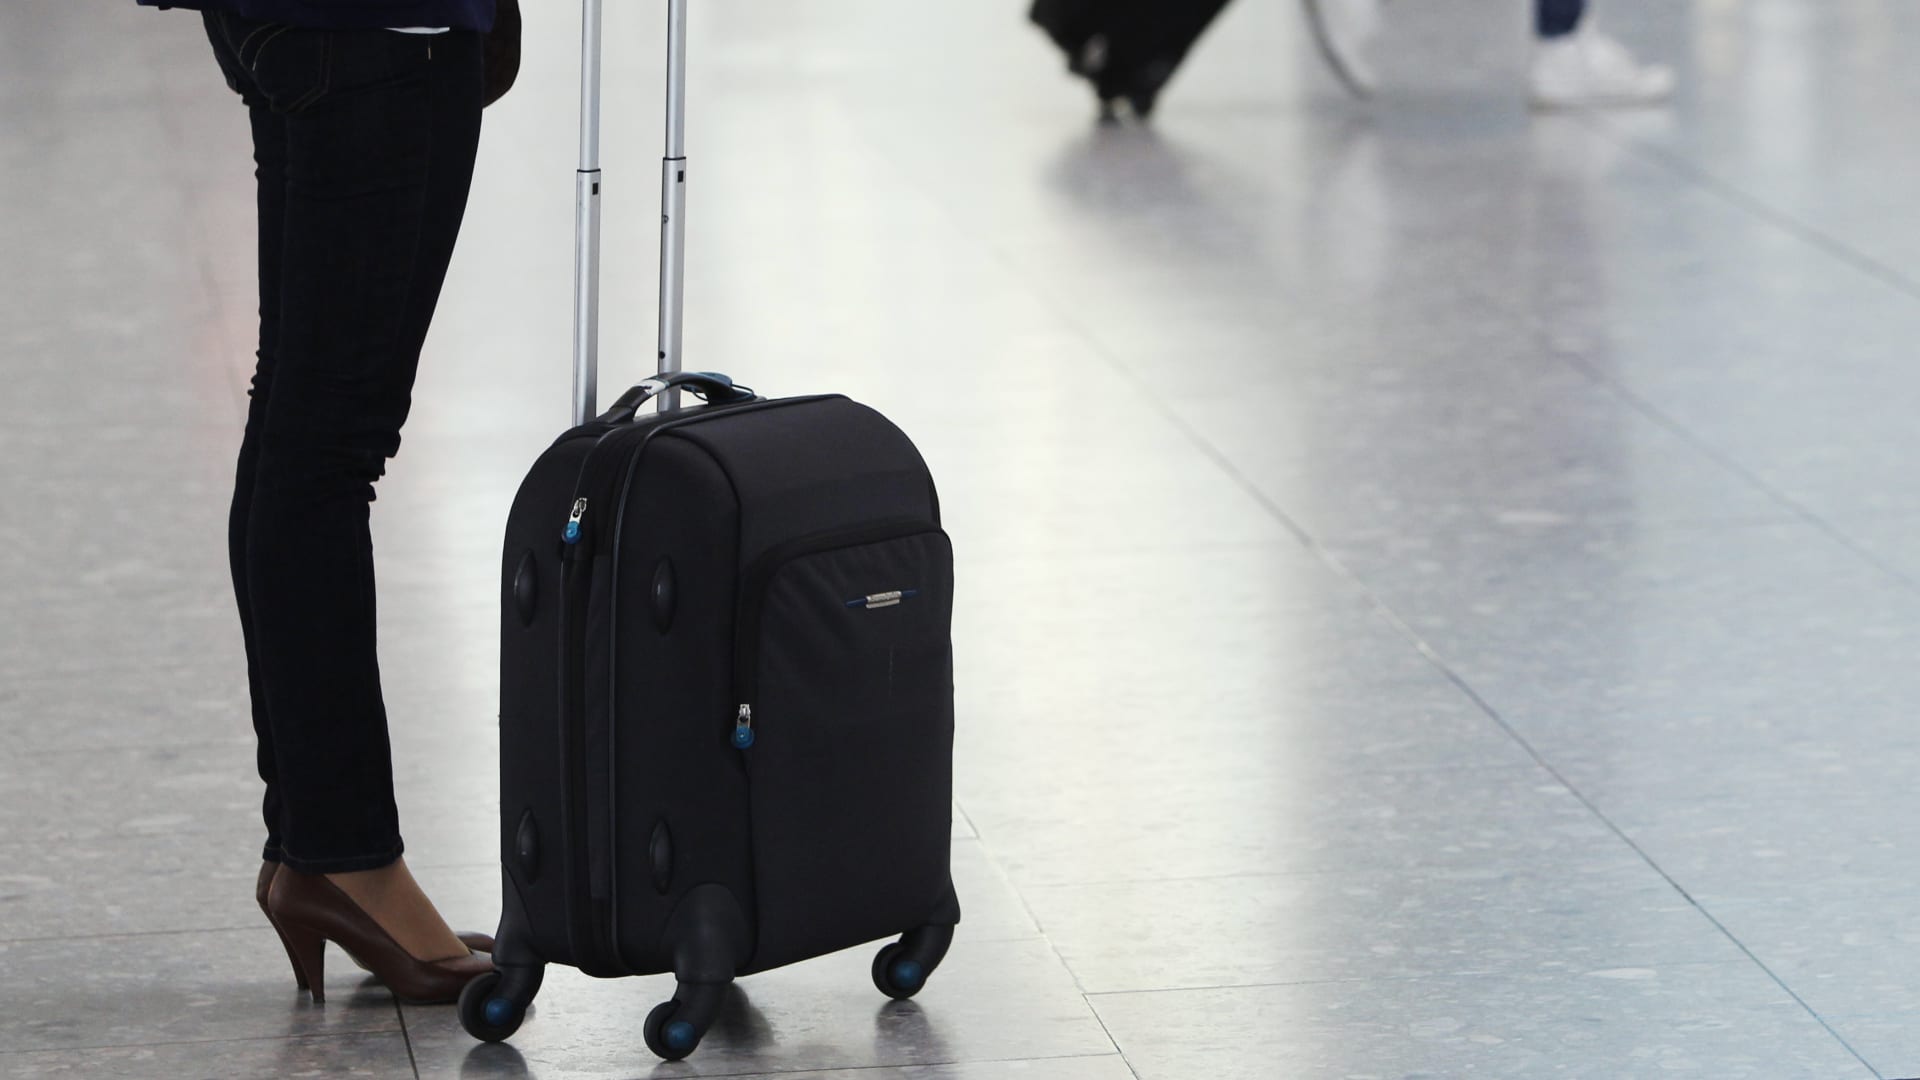 Business travel costs are expected to rise through 2023, industry report says